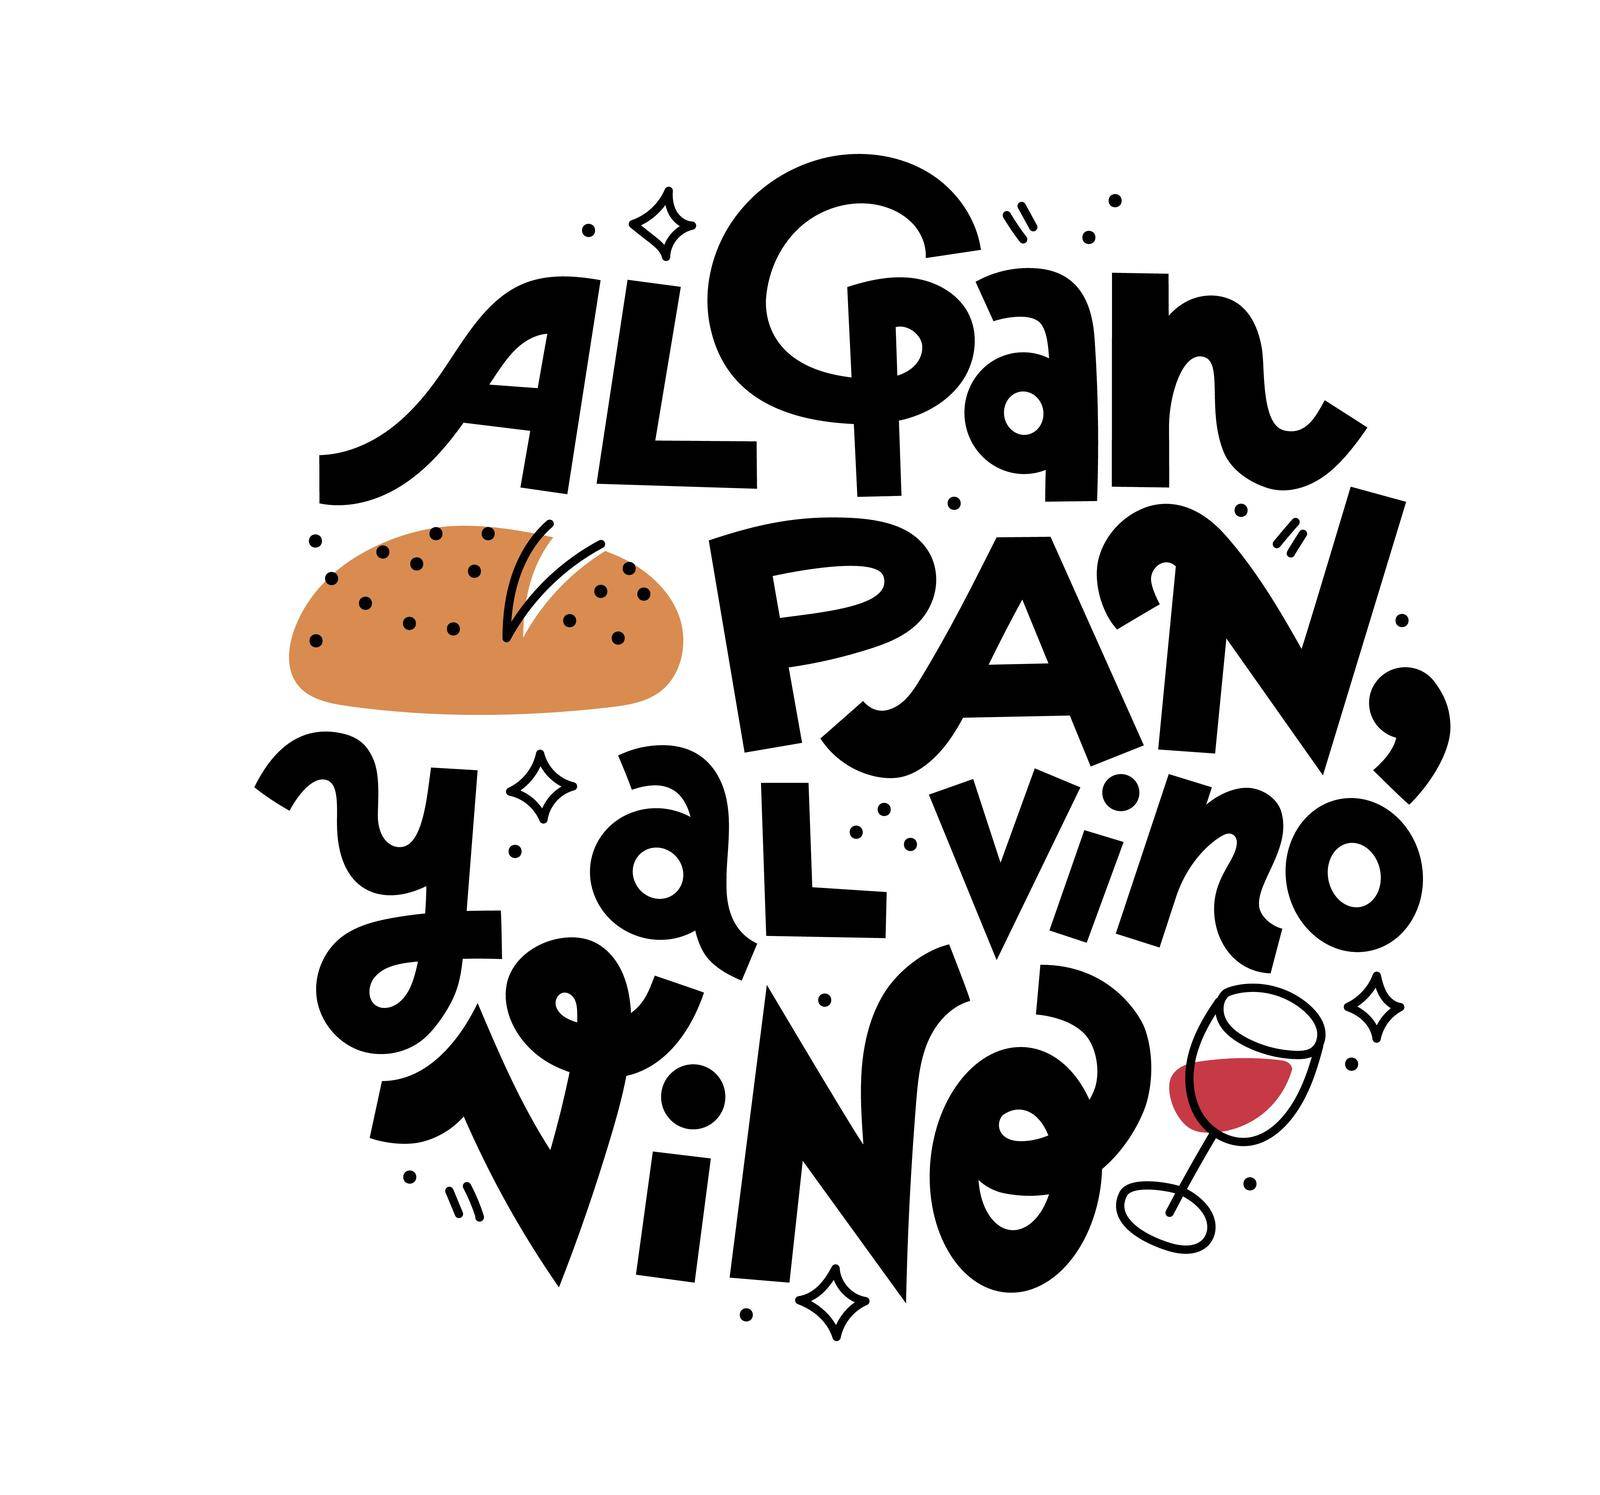 Calling the bread bread and the wine wine. Spanish saying about bread. Hand drawn lettering print for T-shirts, tote bags, mugs etc. Black typography with color illustration.